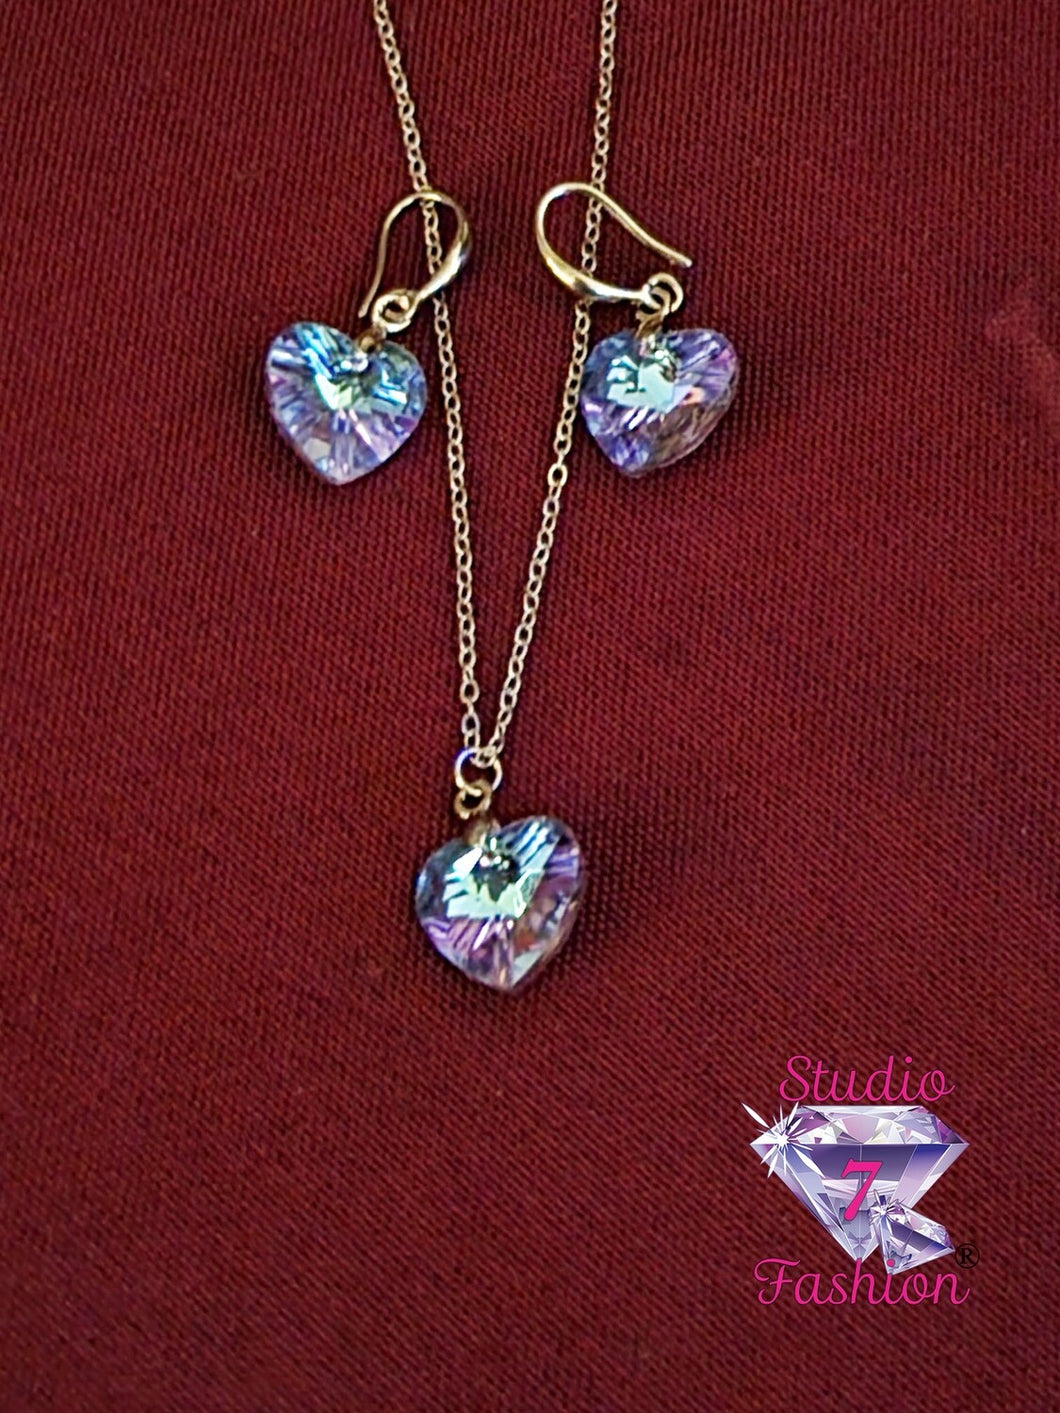 Iridescent Hearts Necklace Earring Set